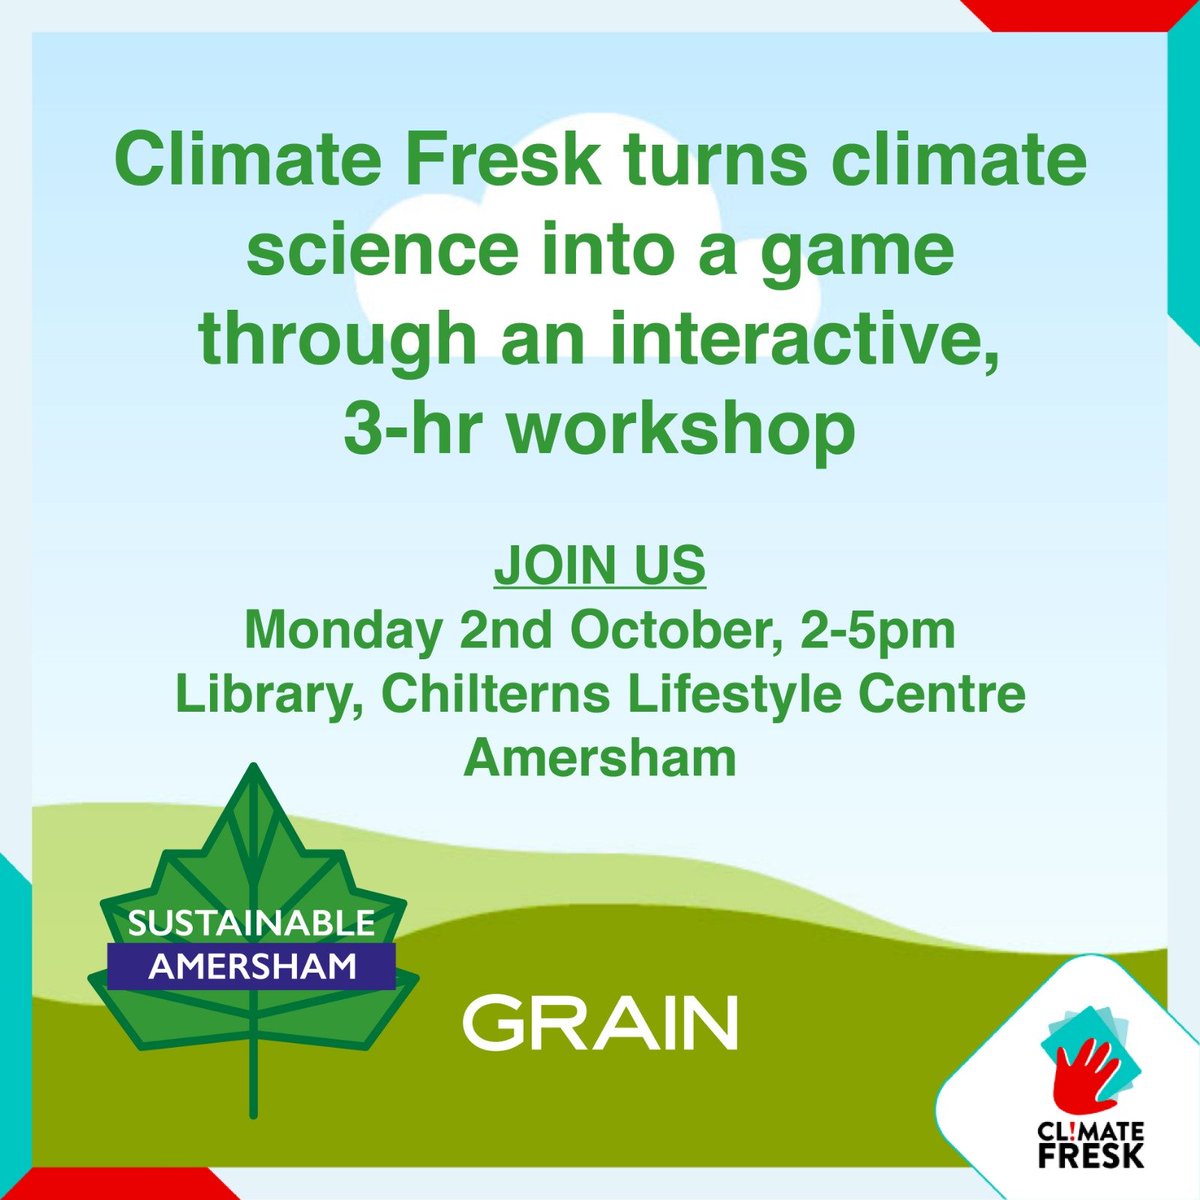 Have you heard of #ClimateFresk? It's a collaborative workshop outlining key climate issues for climate action. Join us! #SustainableAmersham
association.climatefresk.org/training_sessi…